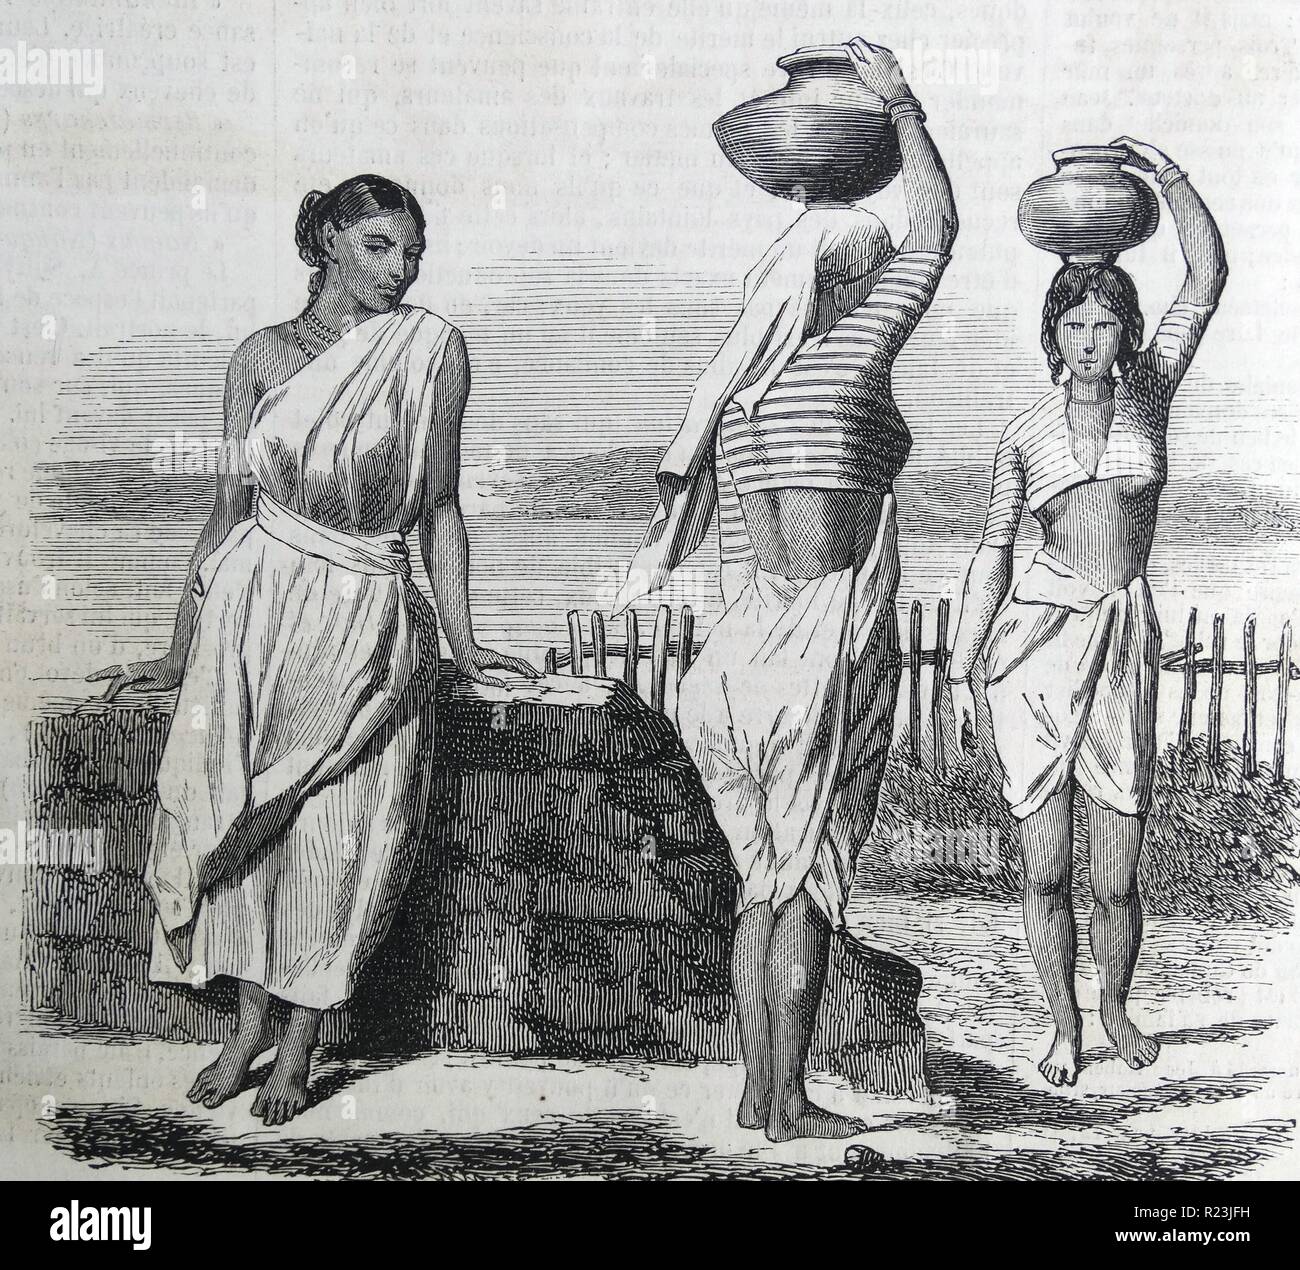 Engraving depicting a Malabar woman and women from Mumbai. Dated 1845 Stock Photo